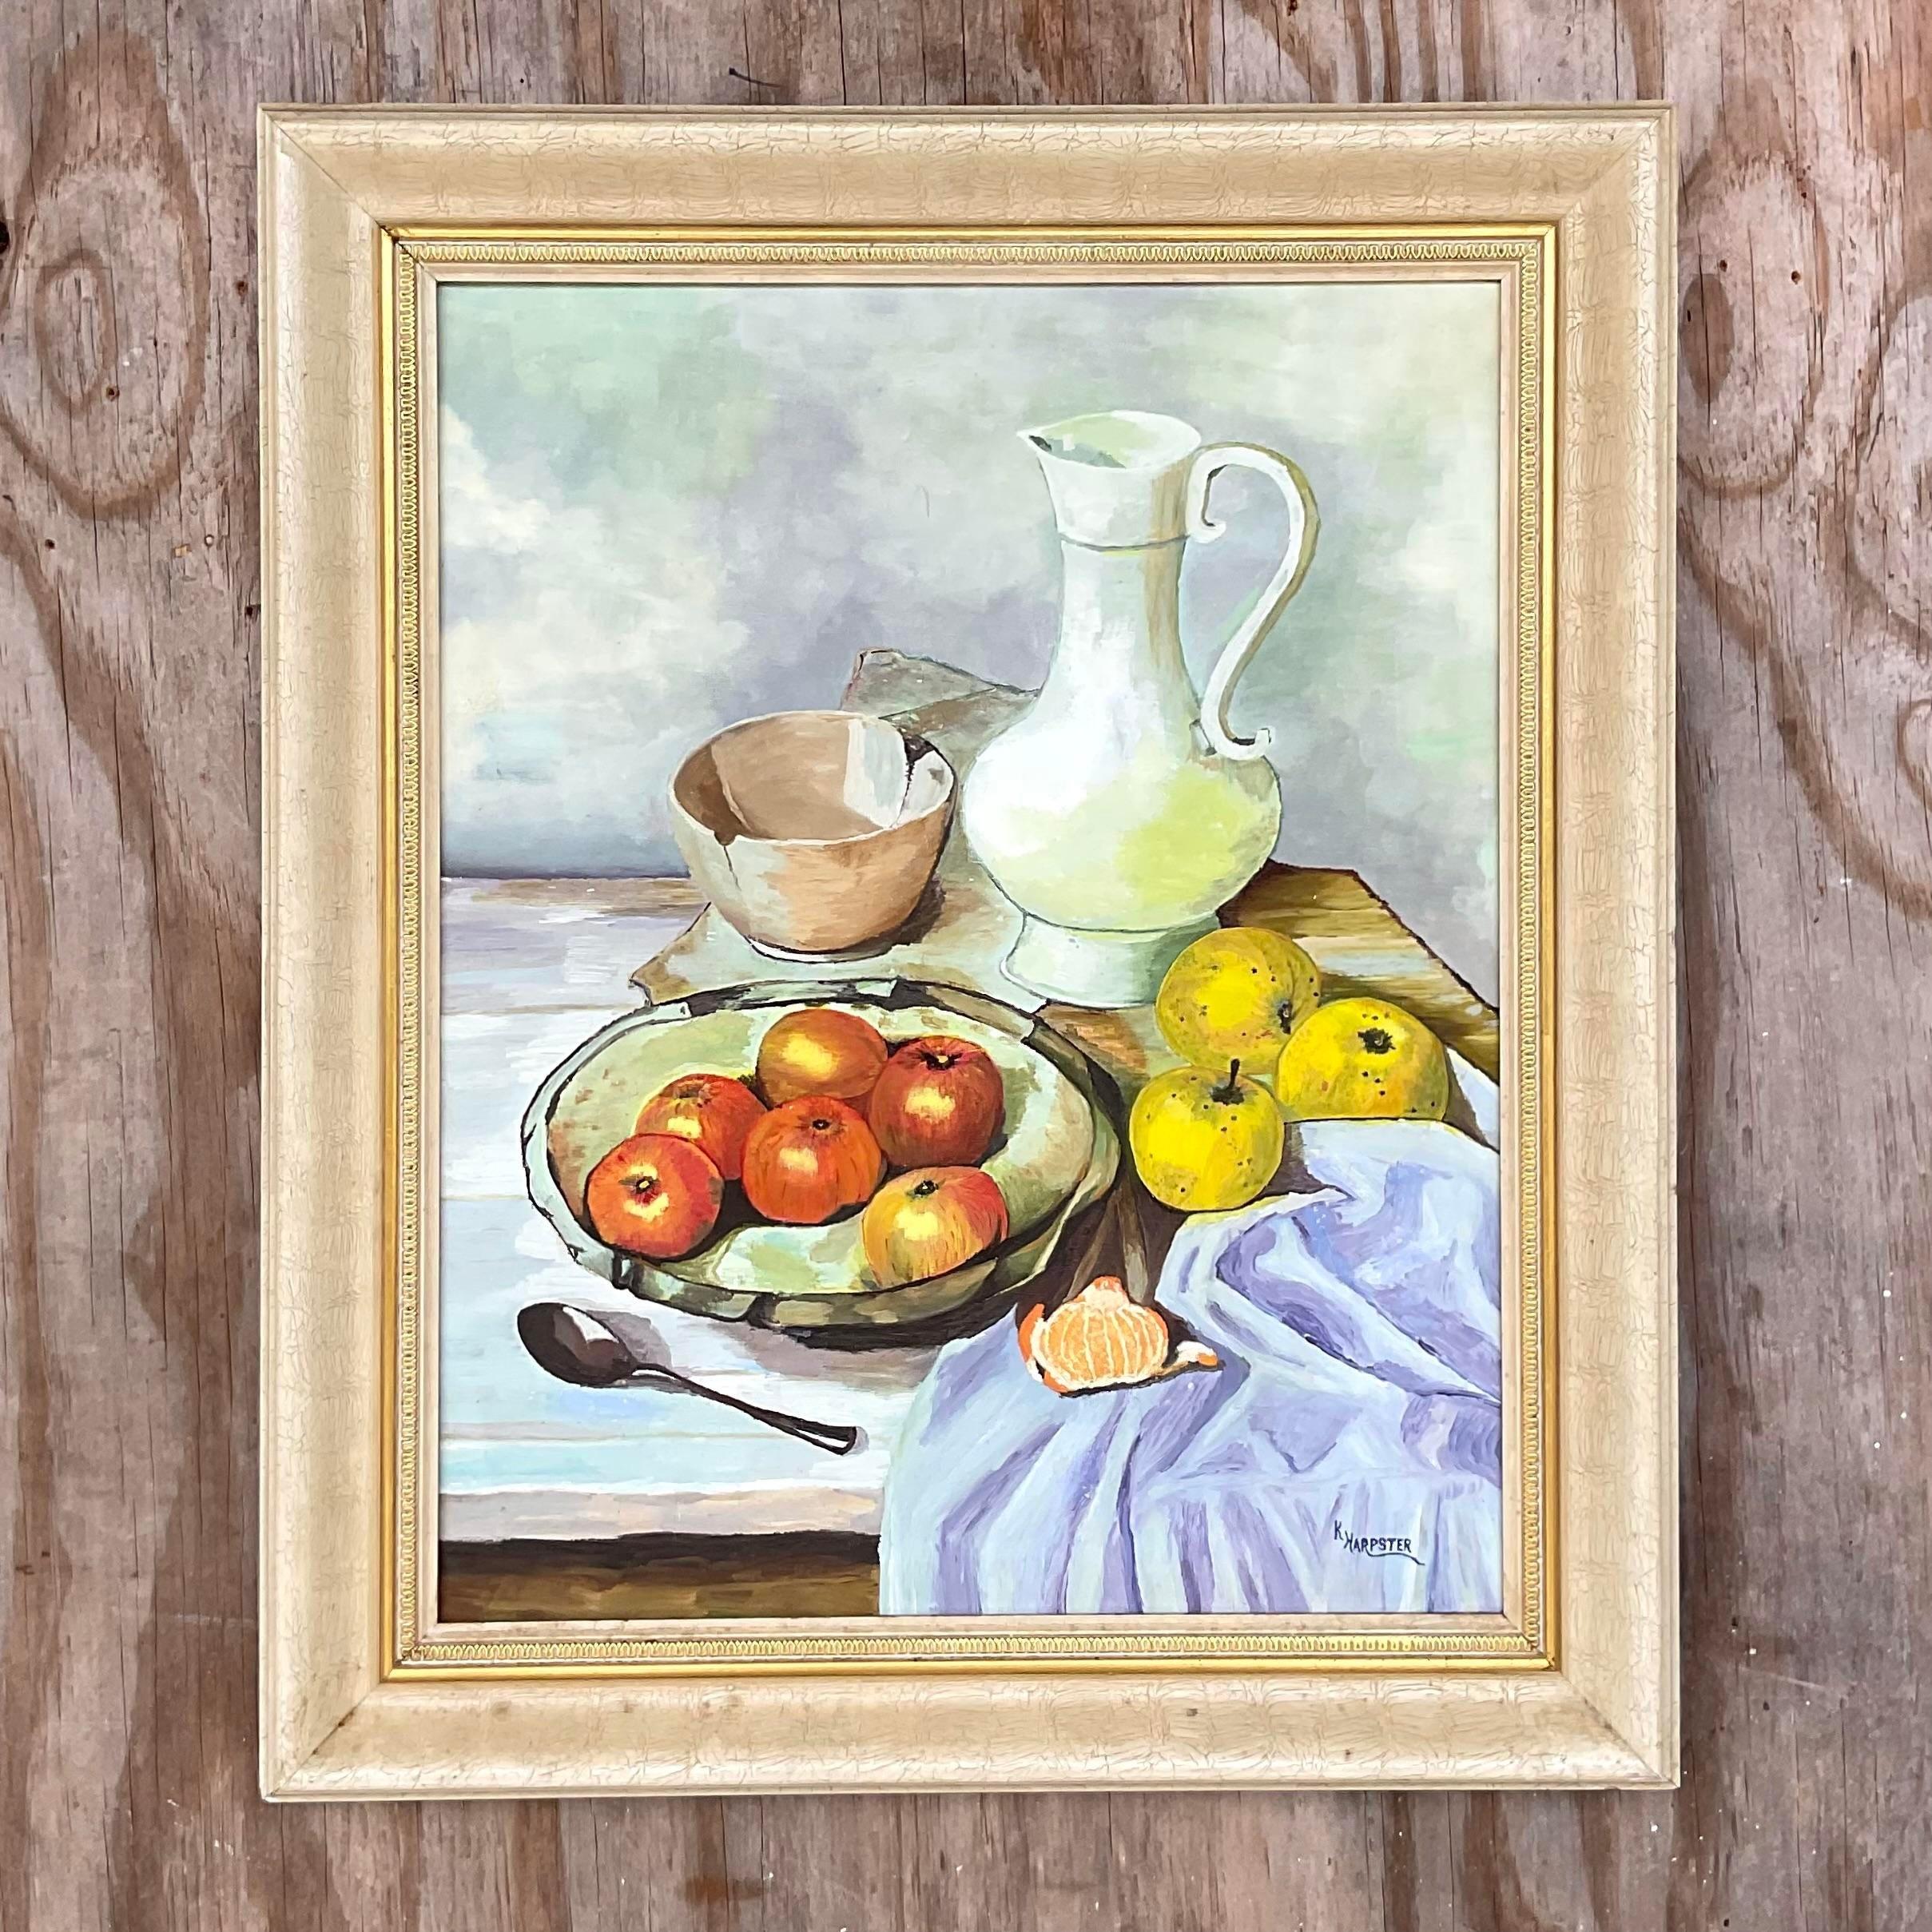 Canvas Vintage Realist Still Life Signed Original Oil Painting For Sale